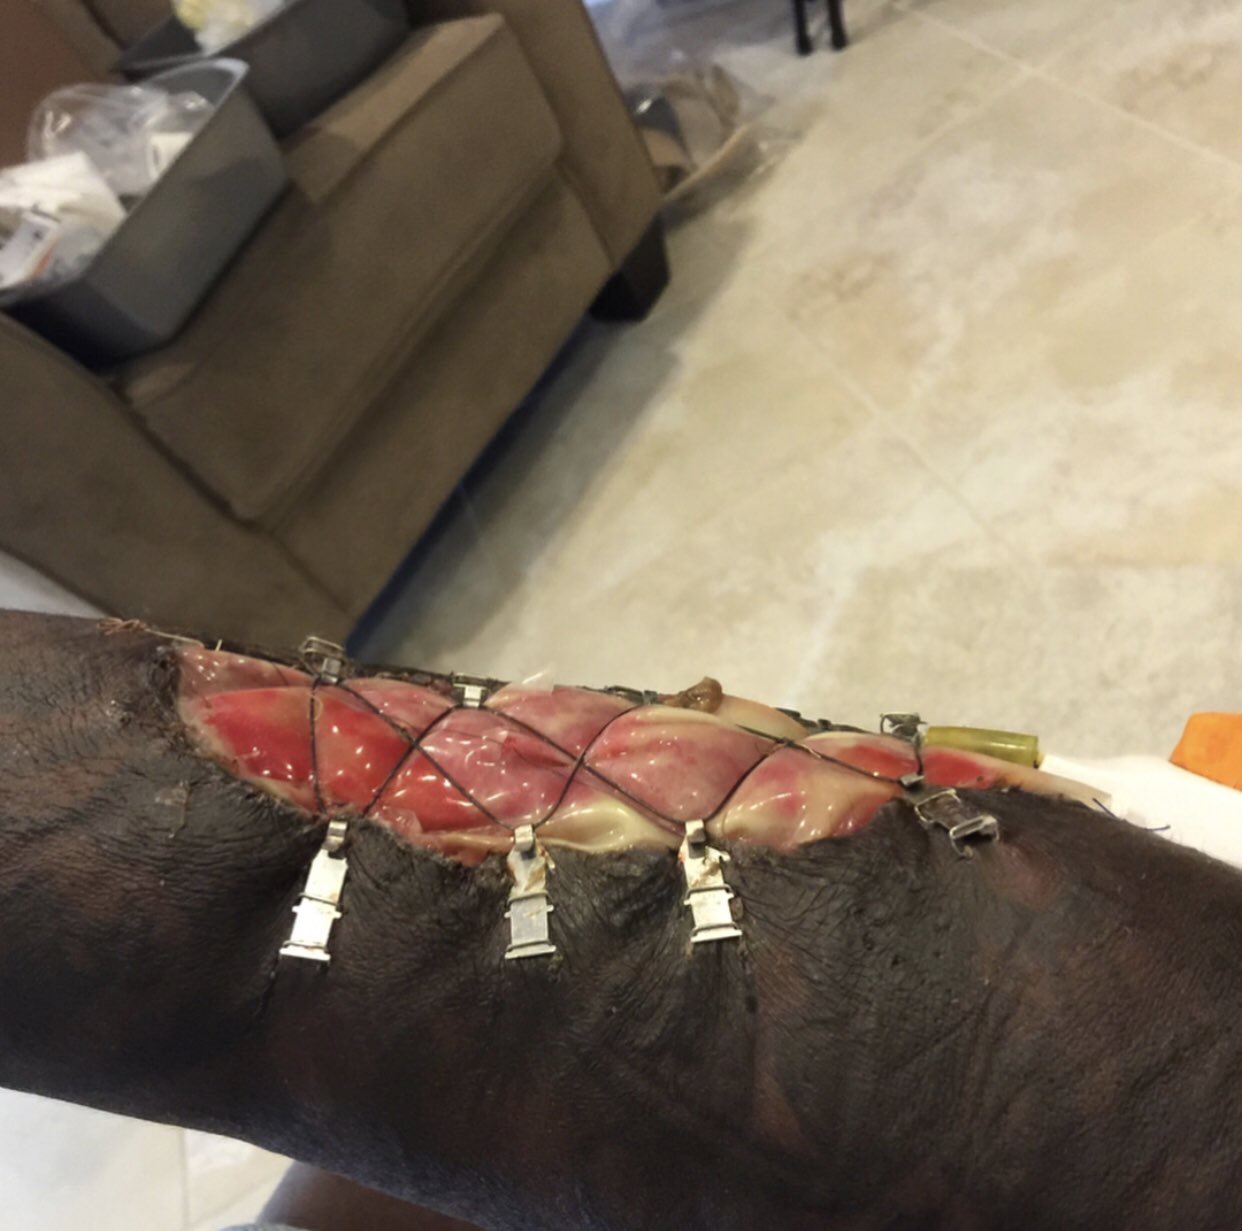 Jason Pierre-Paul Shares Extremely Graphic Images Of Mangled Hand As July 4th Warning ...1242 x 1231